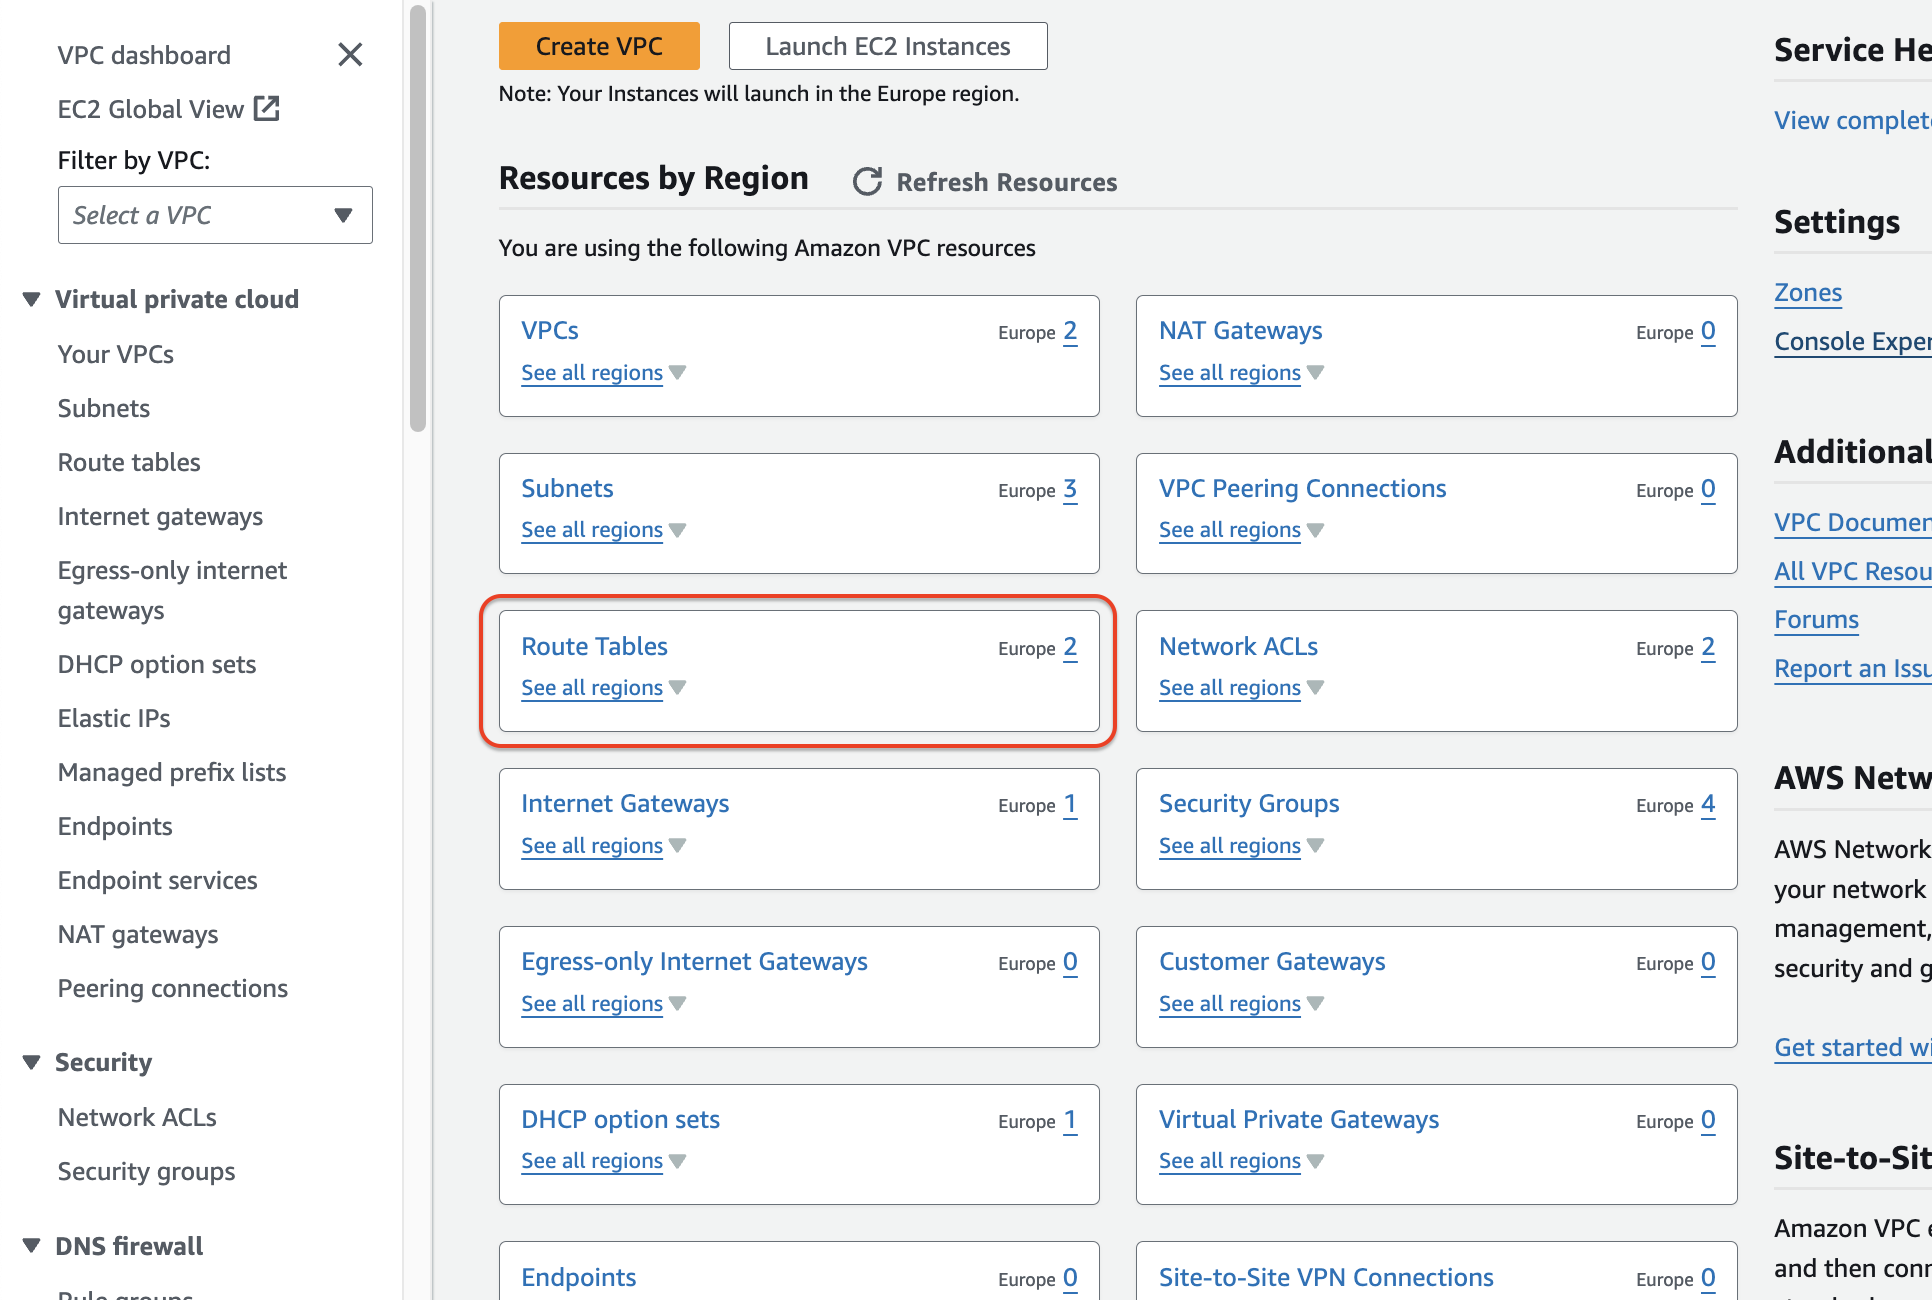 Navigate to the "Route Tables" section within the VPC dashboard.